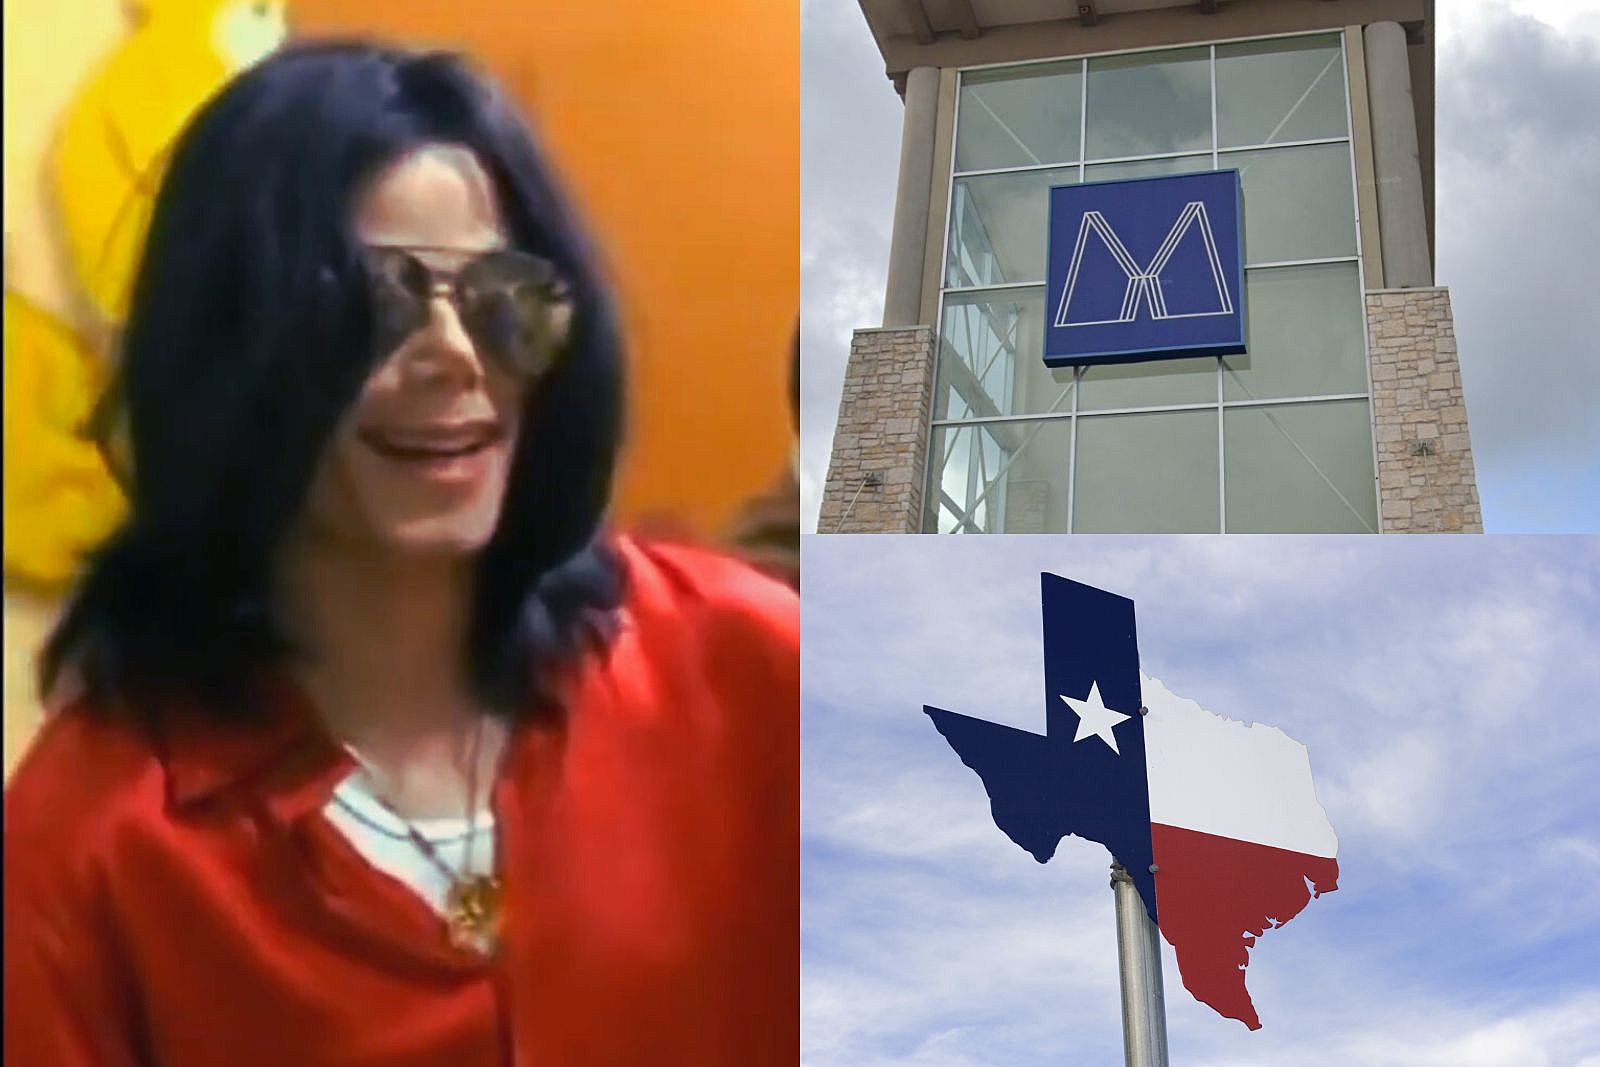 Remembering Michael Jacksons Retail Adventures at a Texas Mall